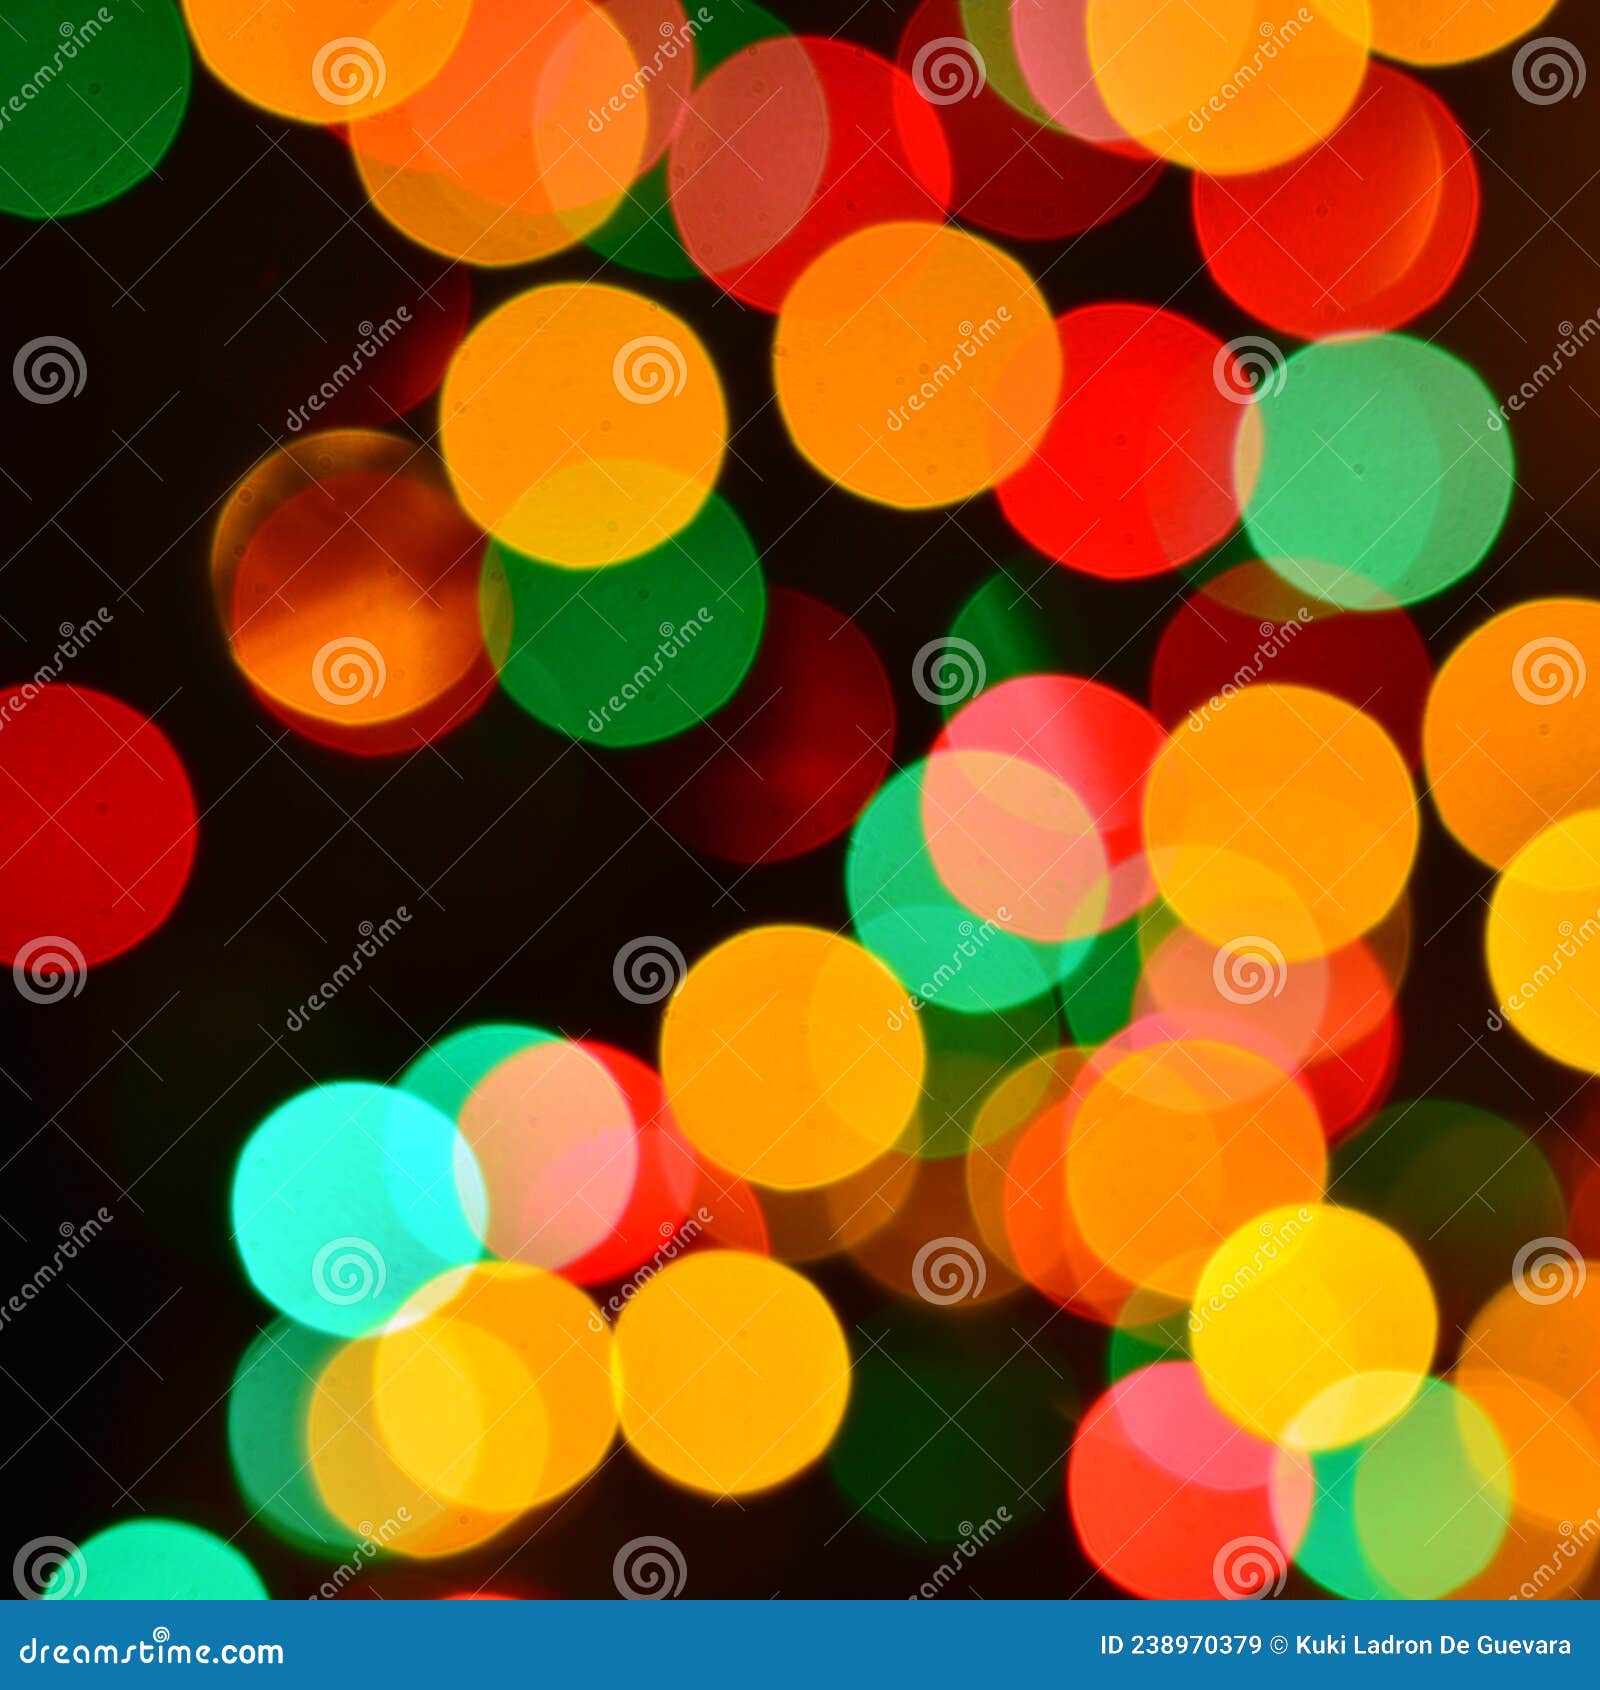 abstract background of defocused christmas lights red, green,